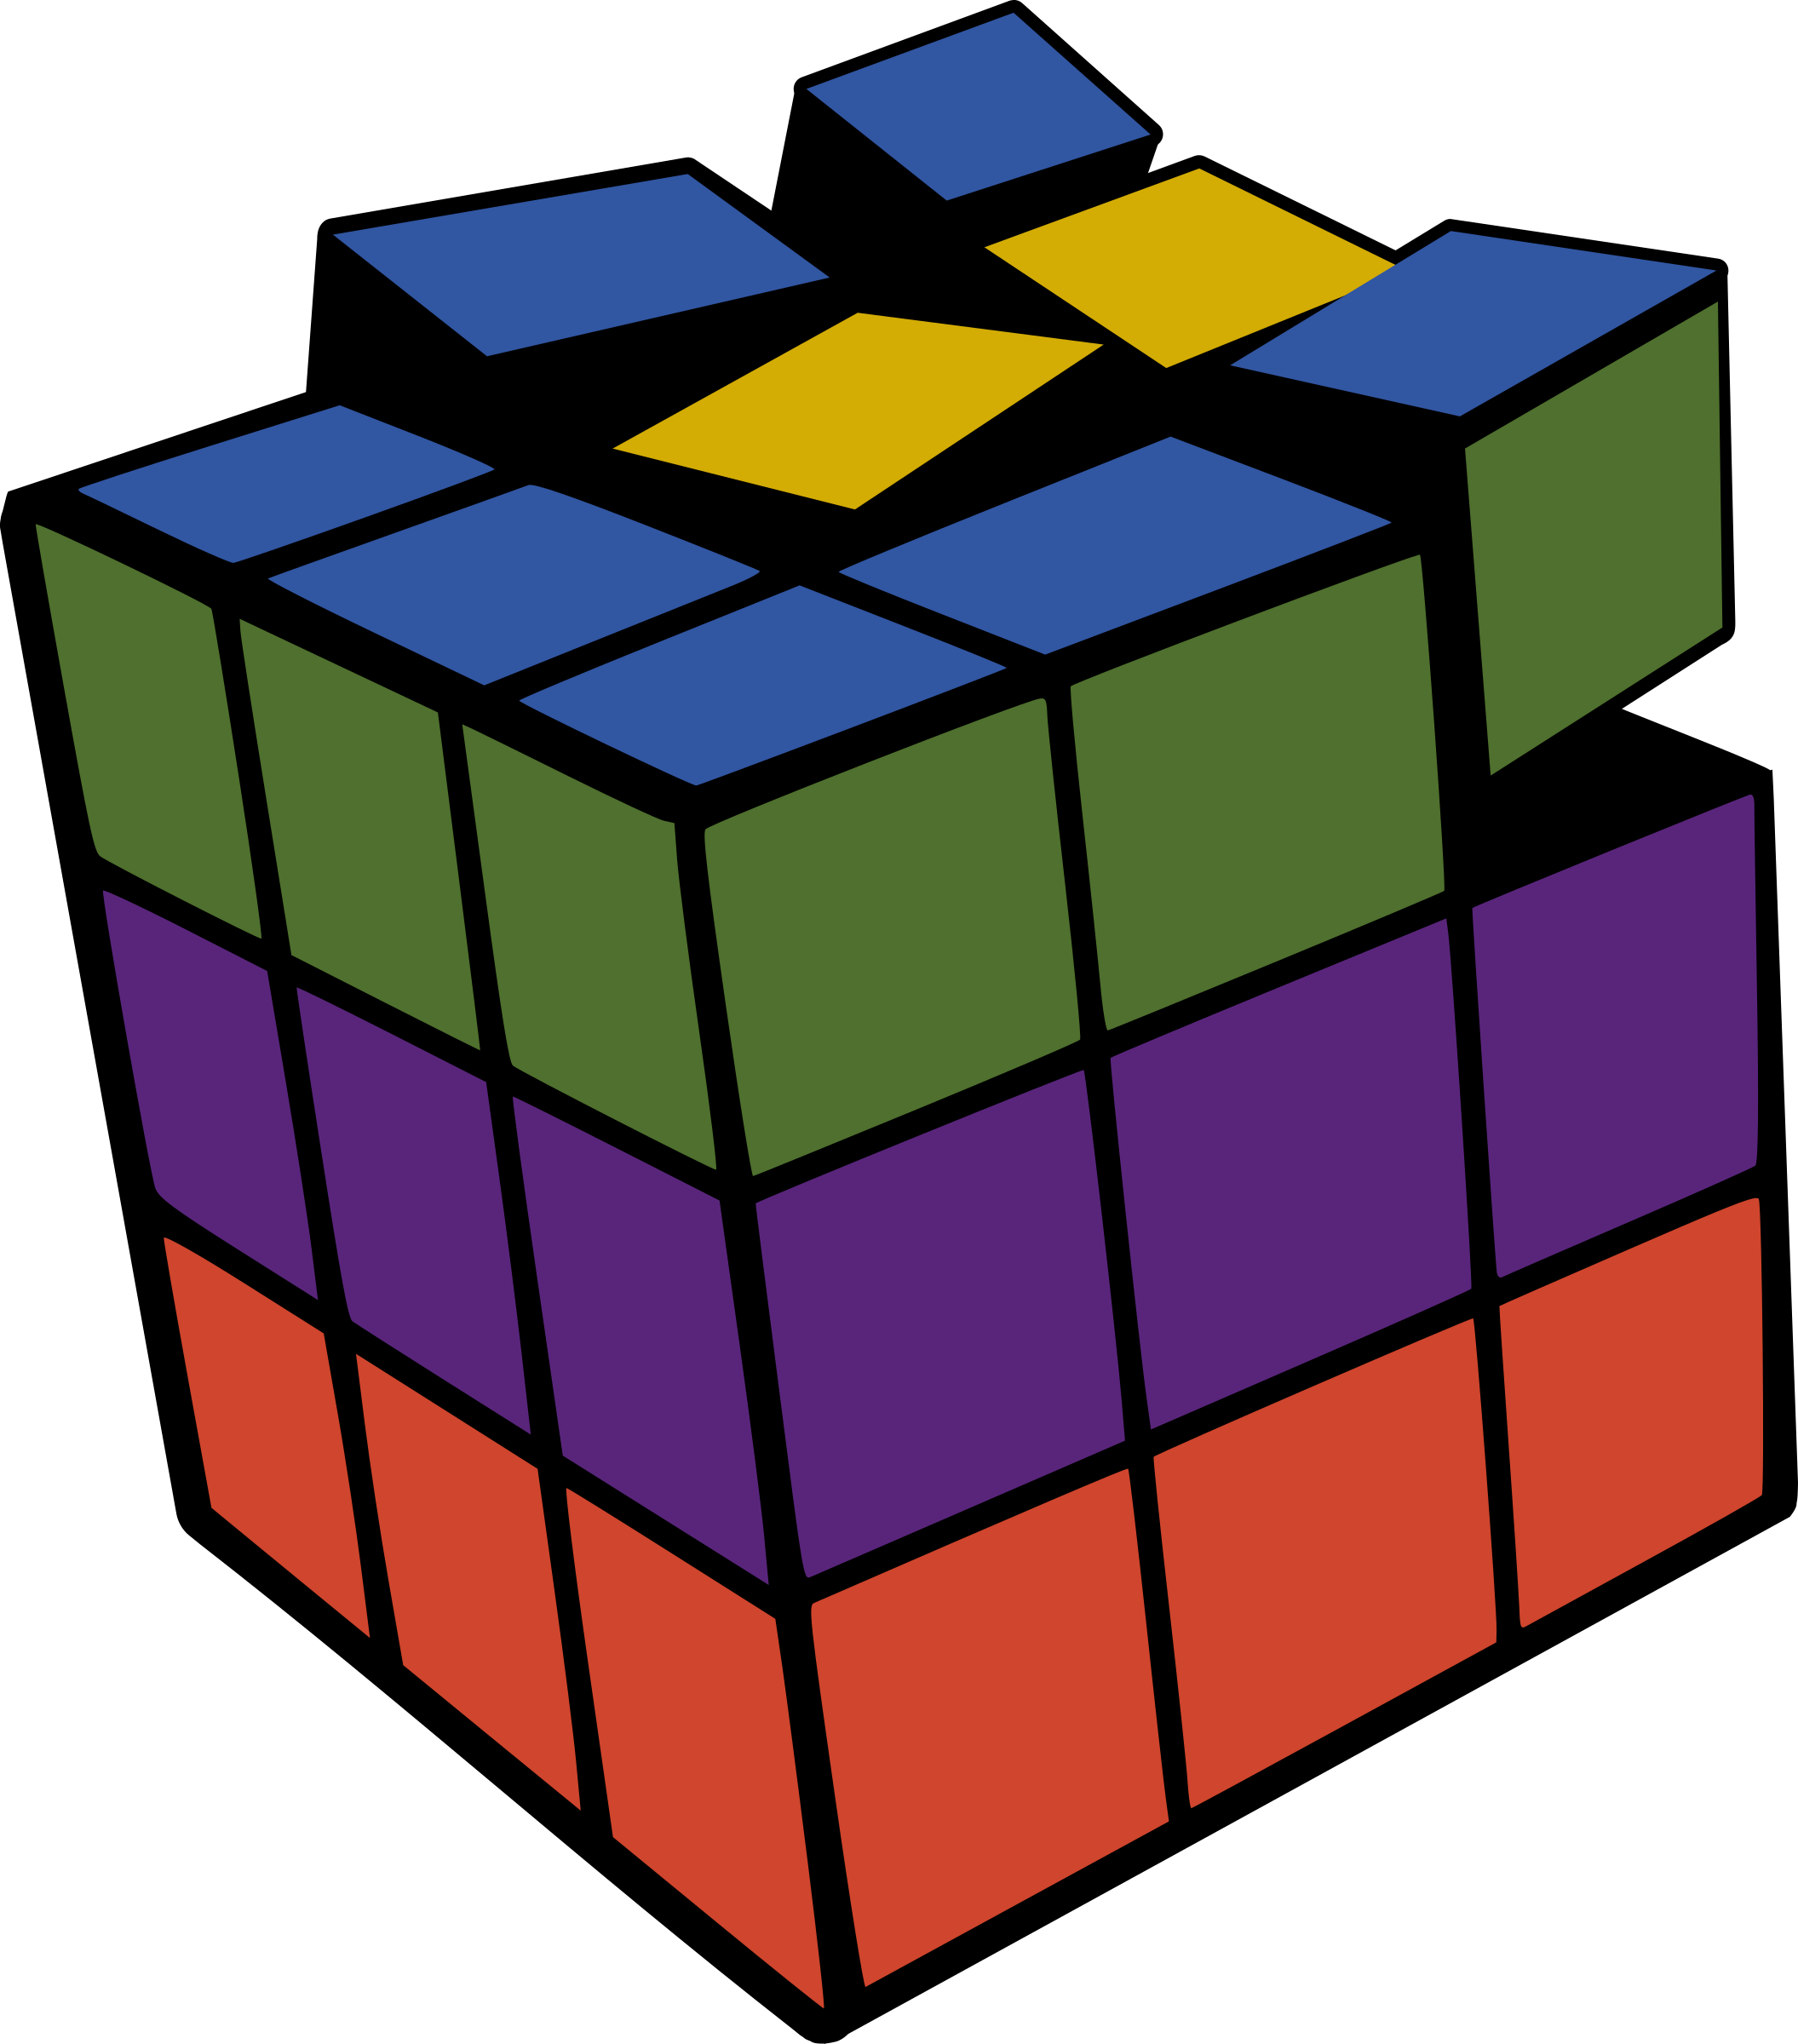 A Colorful Cube With Many Squares